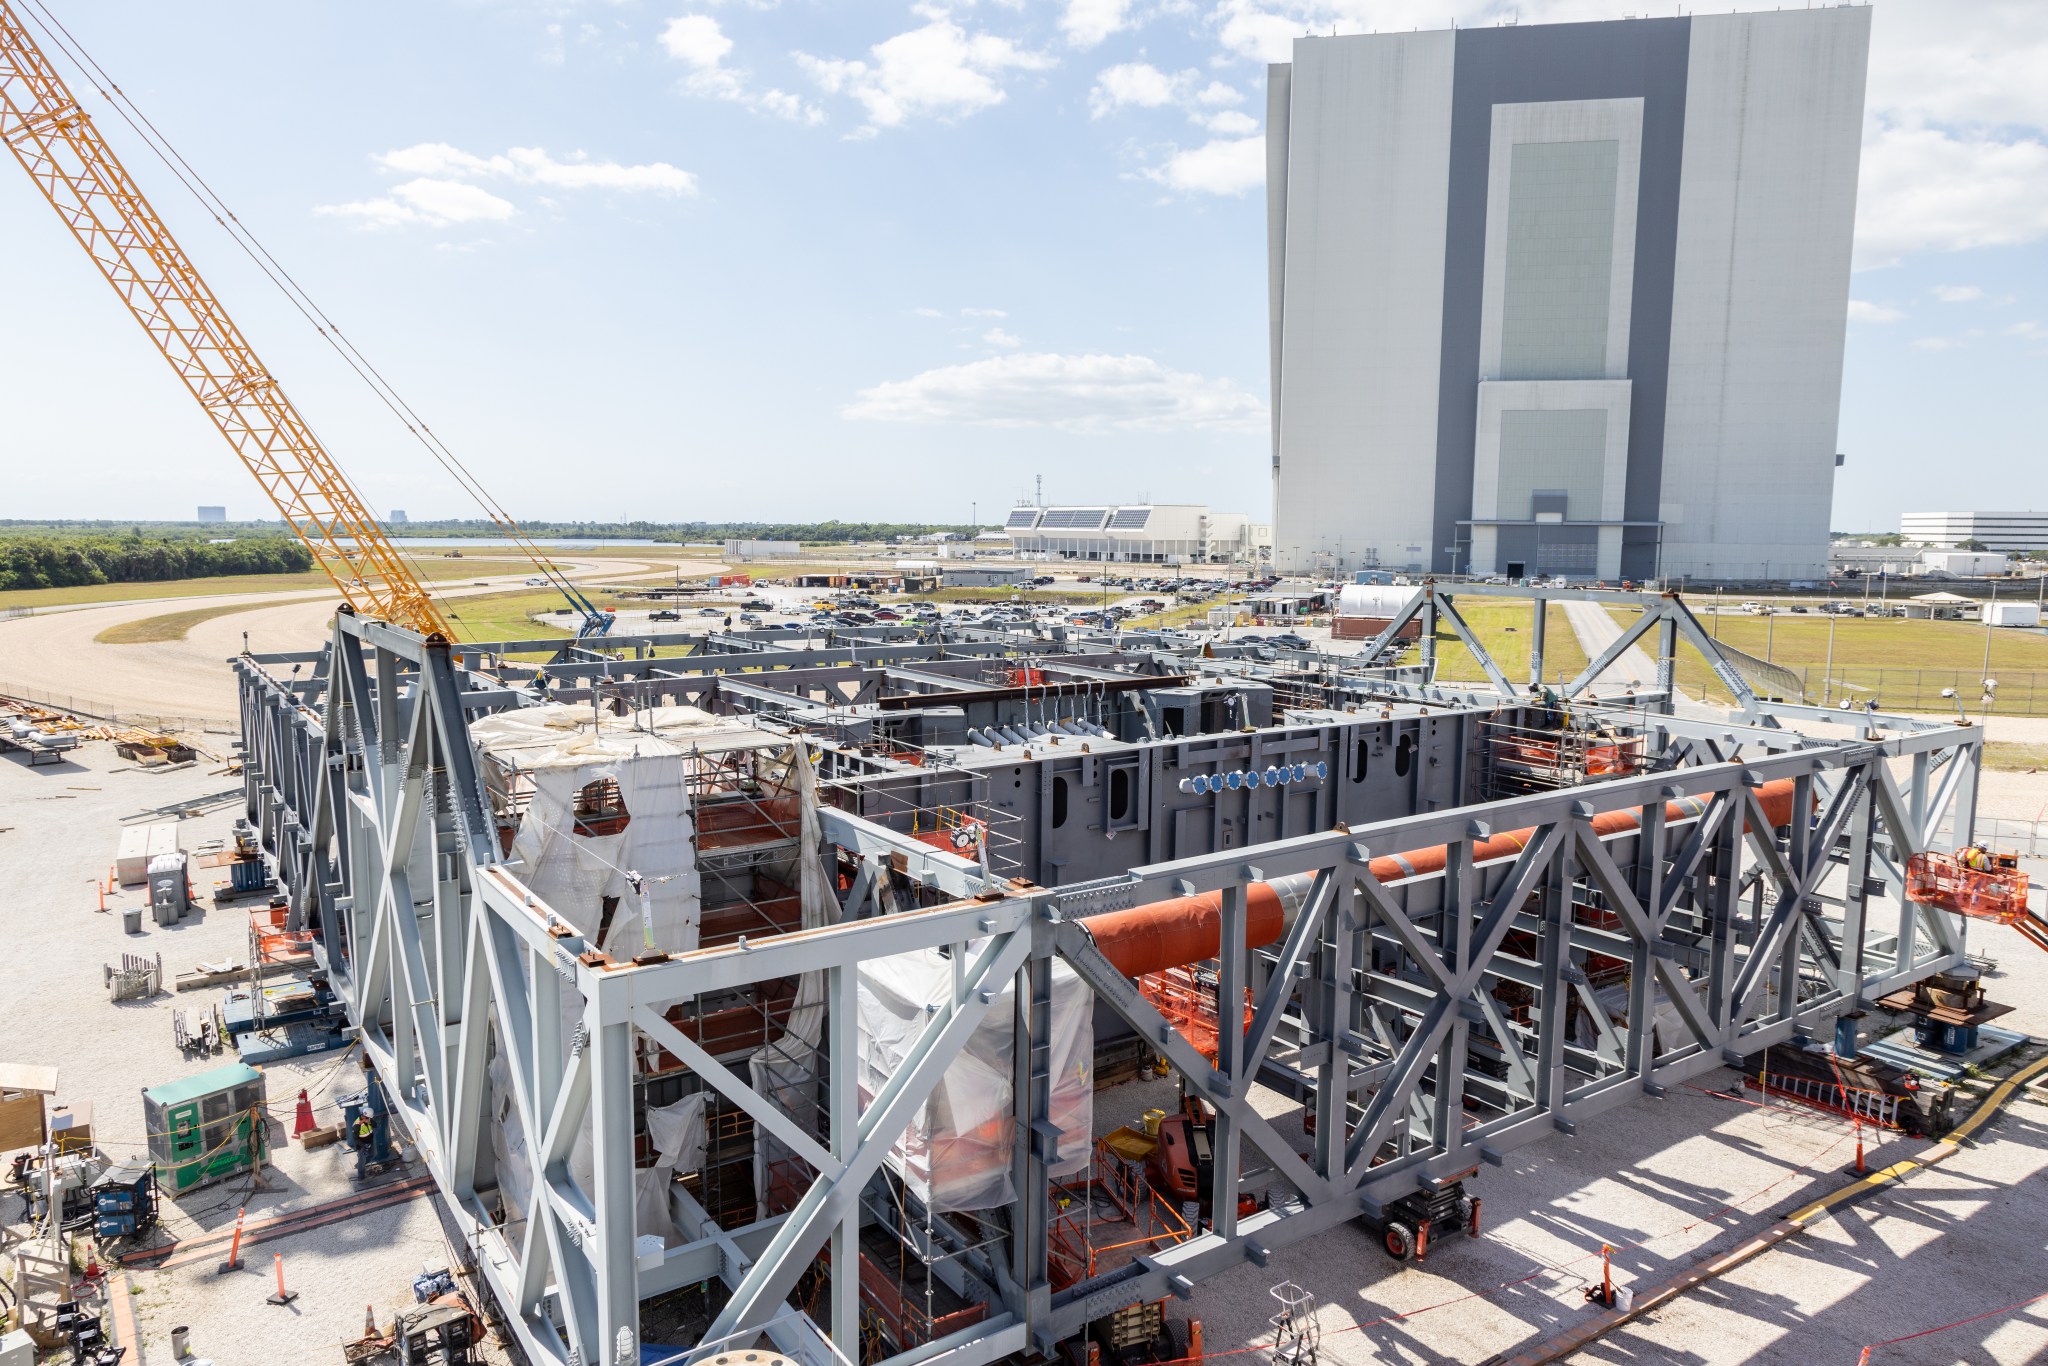 Image shows construction of the platform for mobile launcher 2 for the Artemis missions.